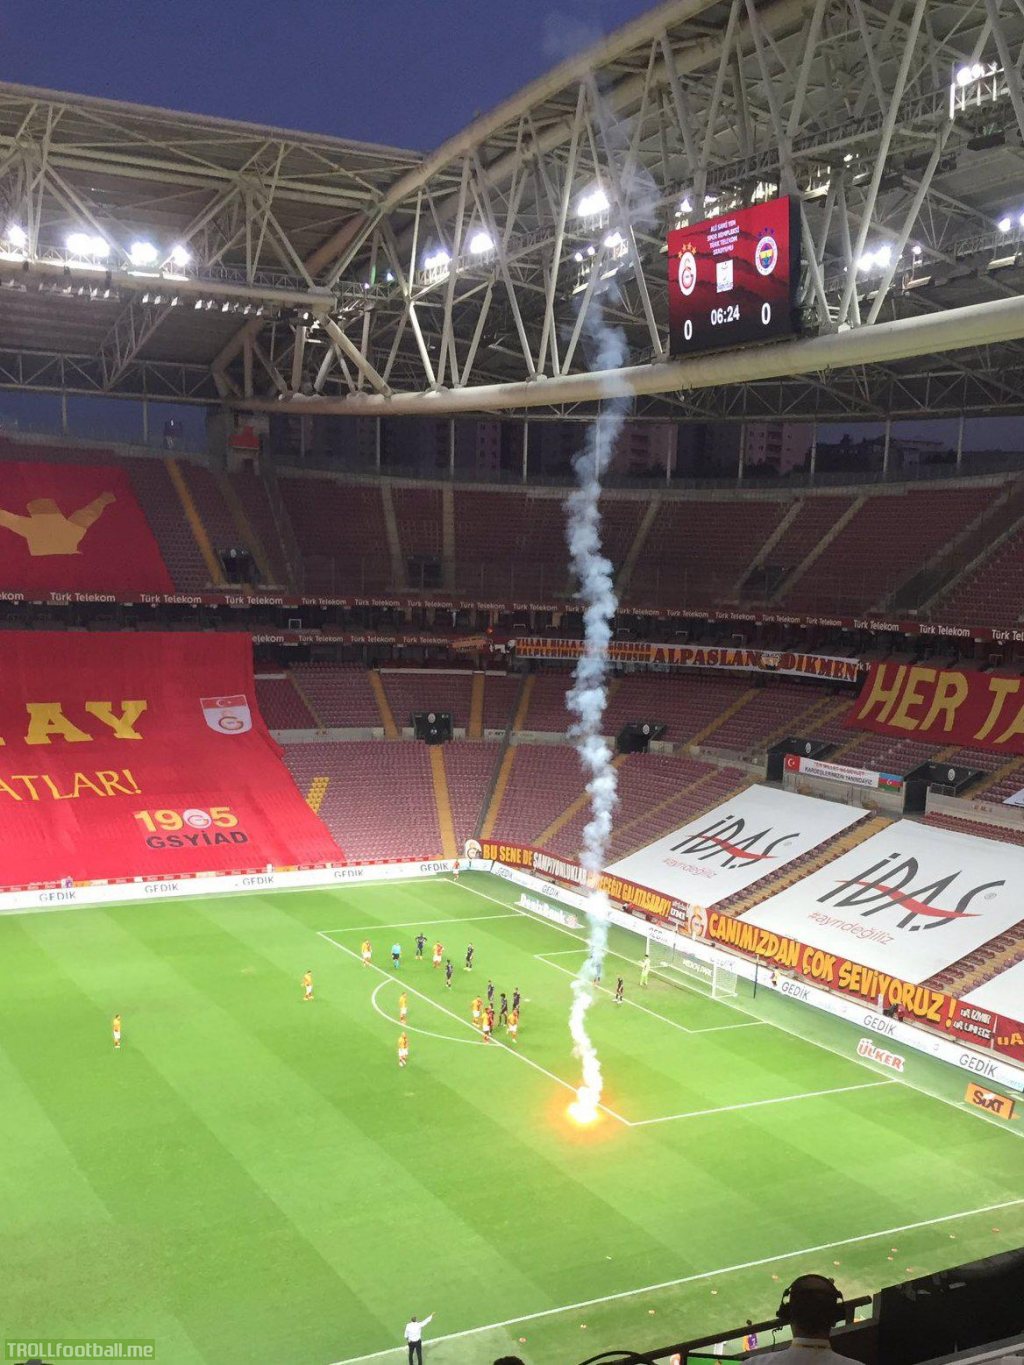 Stoppage in play during the Galatasaray-Fenerbahce match due to flares thrown onto the pitch. There are no fans in attendance. The flare came from the outside.